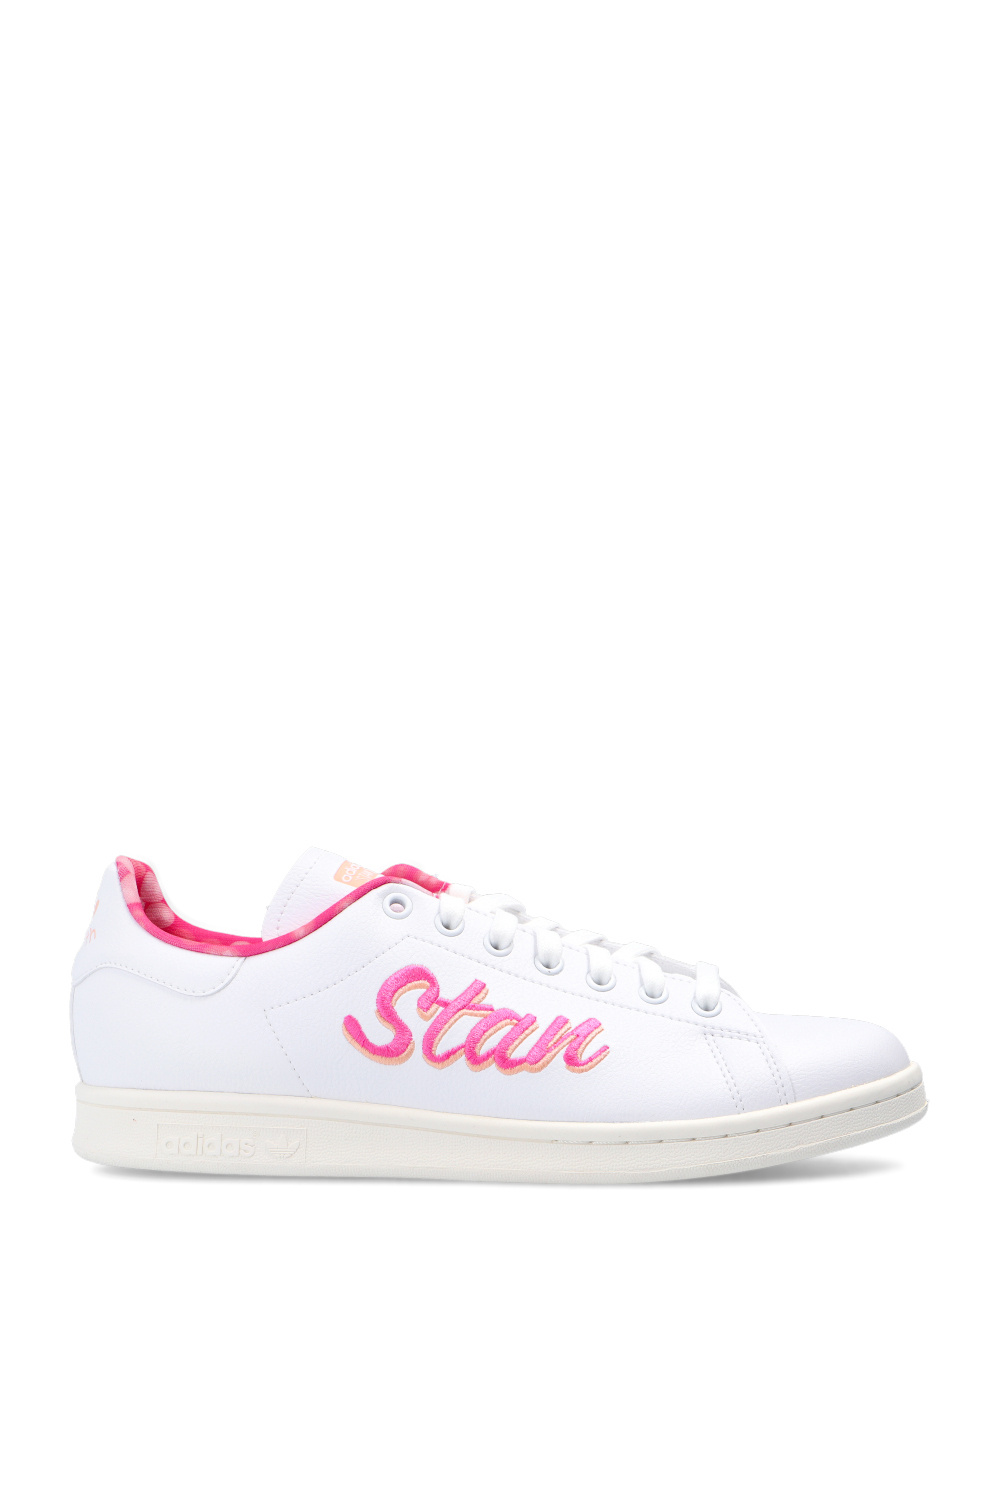 stan smith shoes montreal